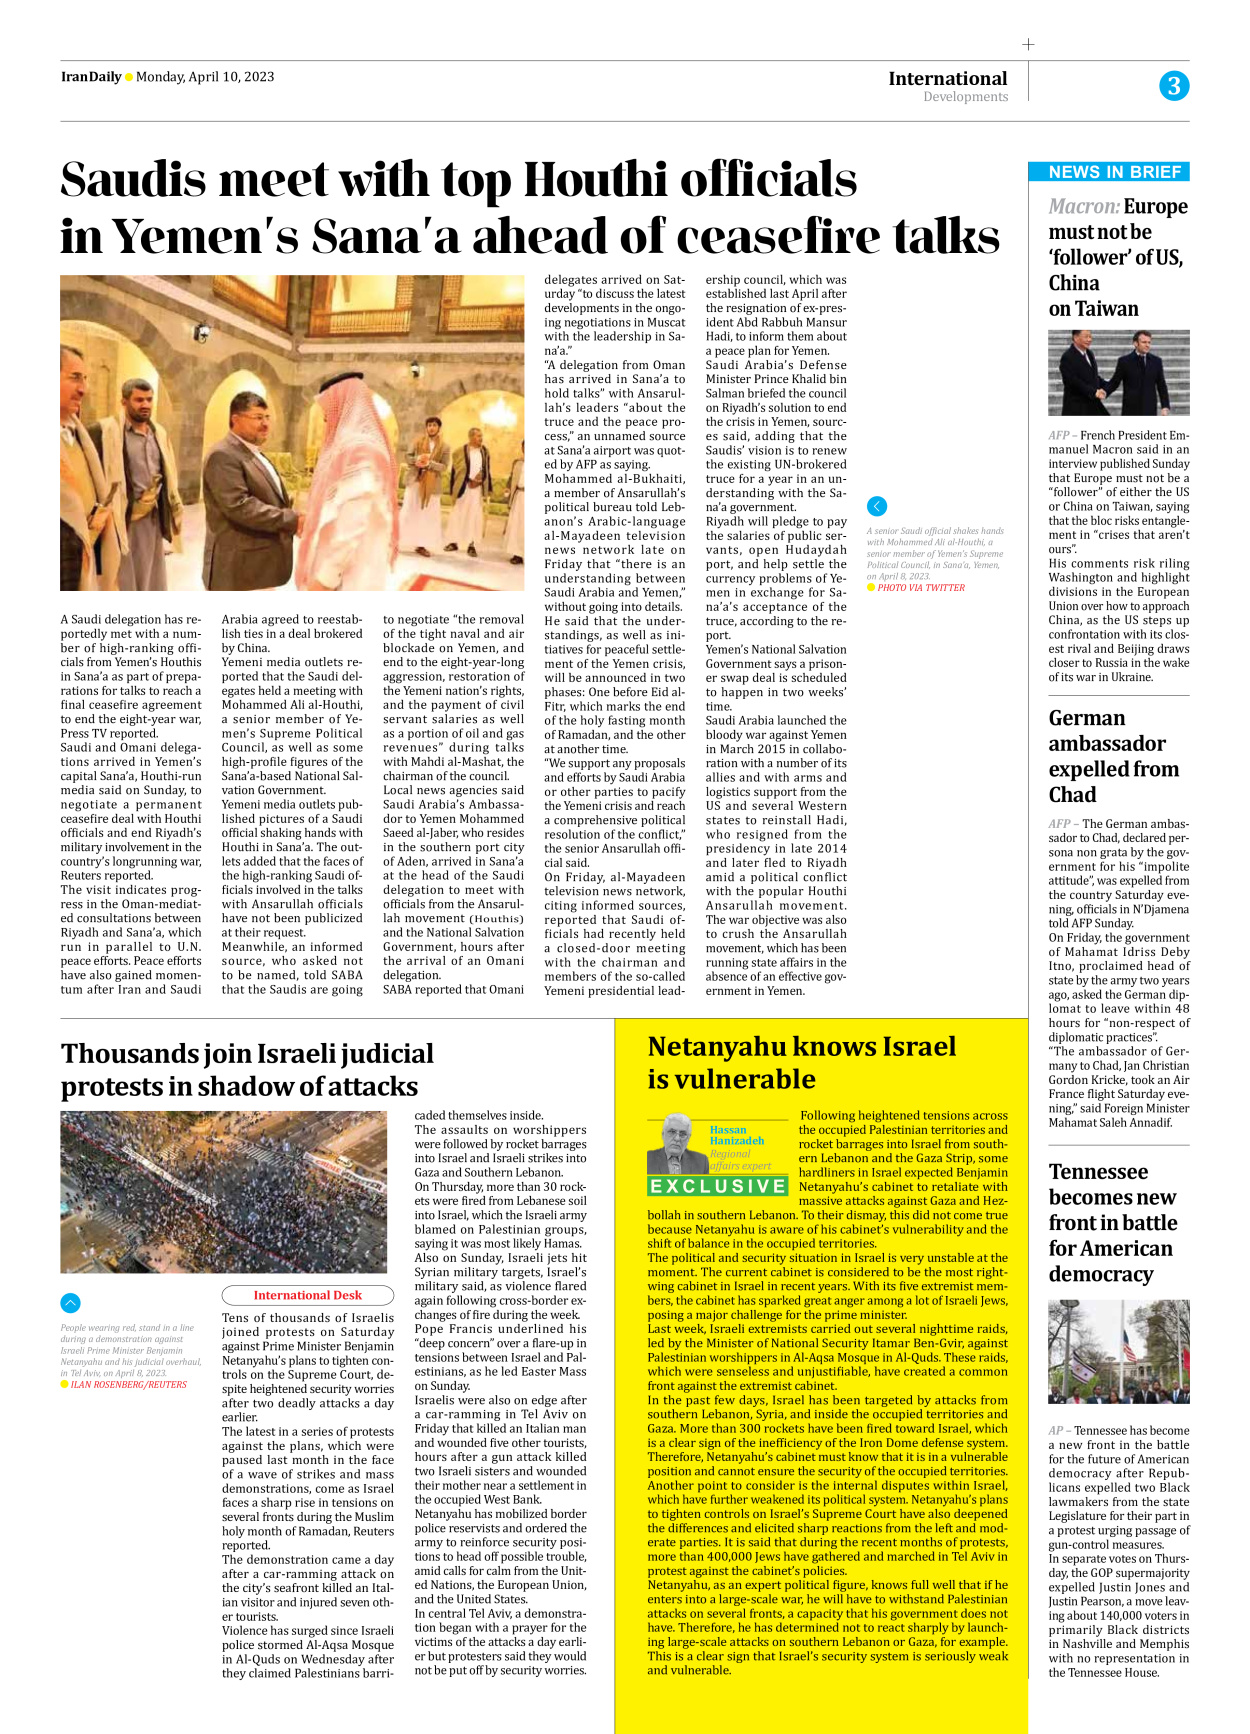 Iran Daily - Number Seven Thousand Two Hundred and Sixty Six - 10 April 2023 - Page 3